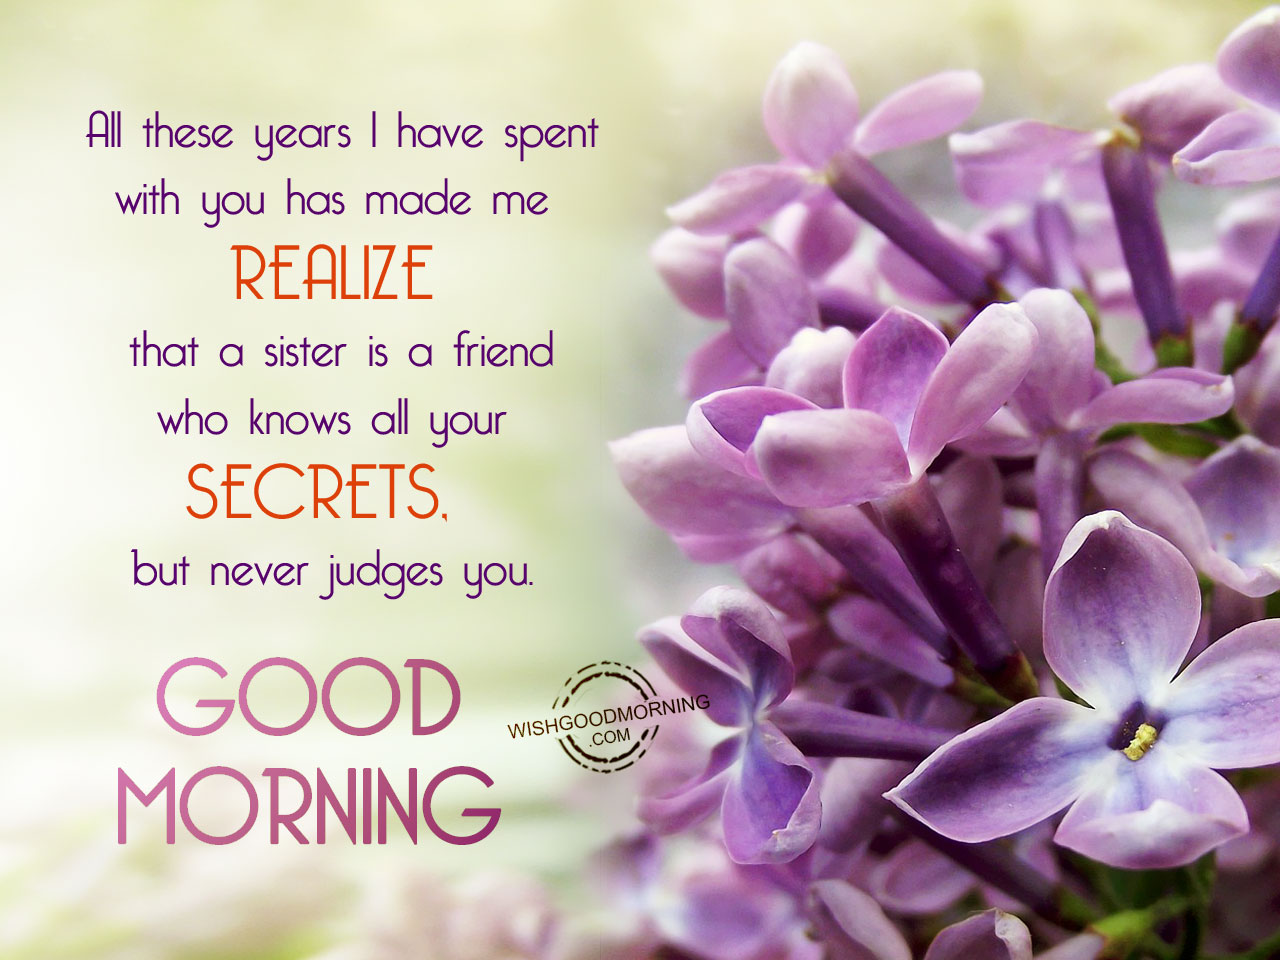 a href="https://www.wishgoodmorning.com/good-morning-wishes-for-sister/all-these-year...